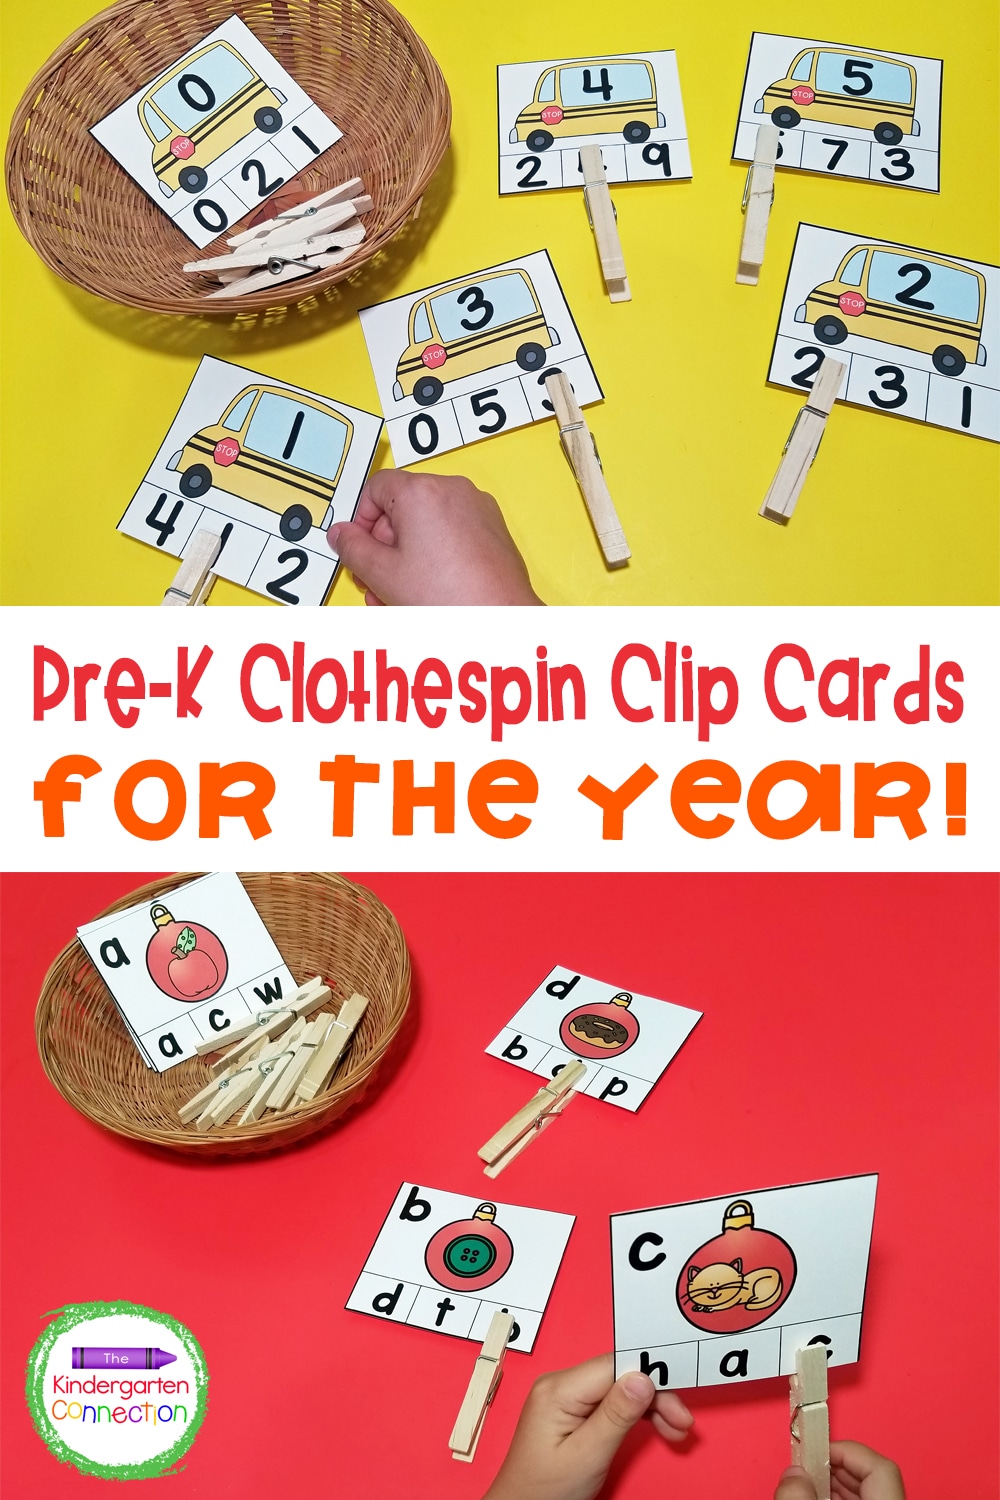 These Math and Literacy Clip Cards for Pre-K strengthen multiple skills, are low-prep, and provide tons of learning fun for the whole year!